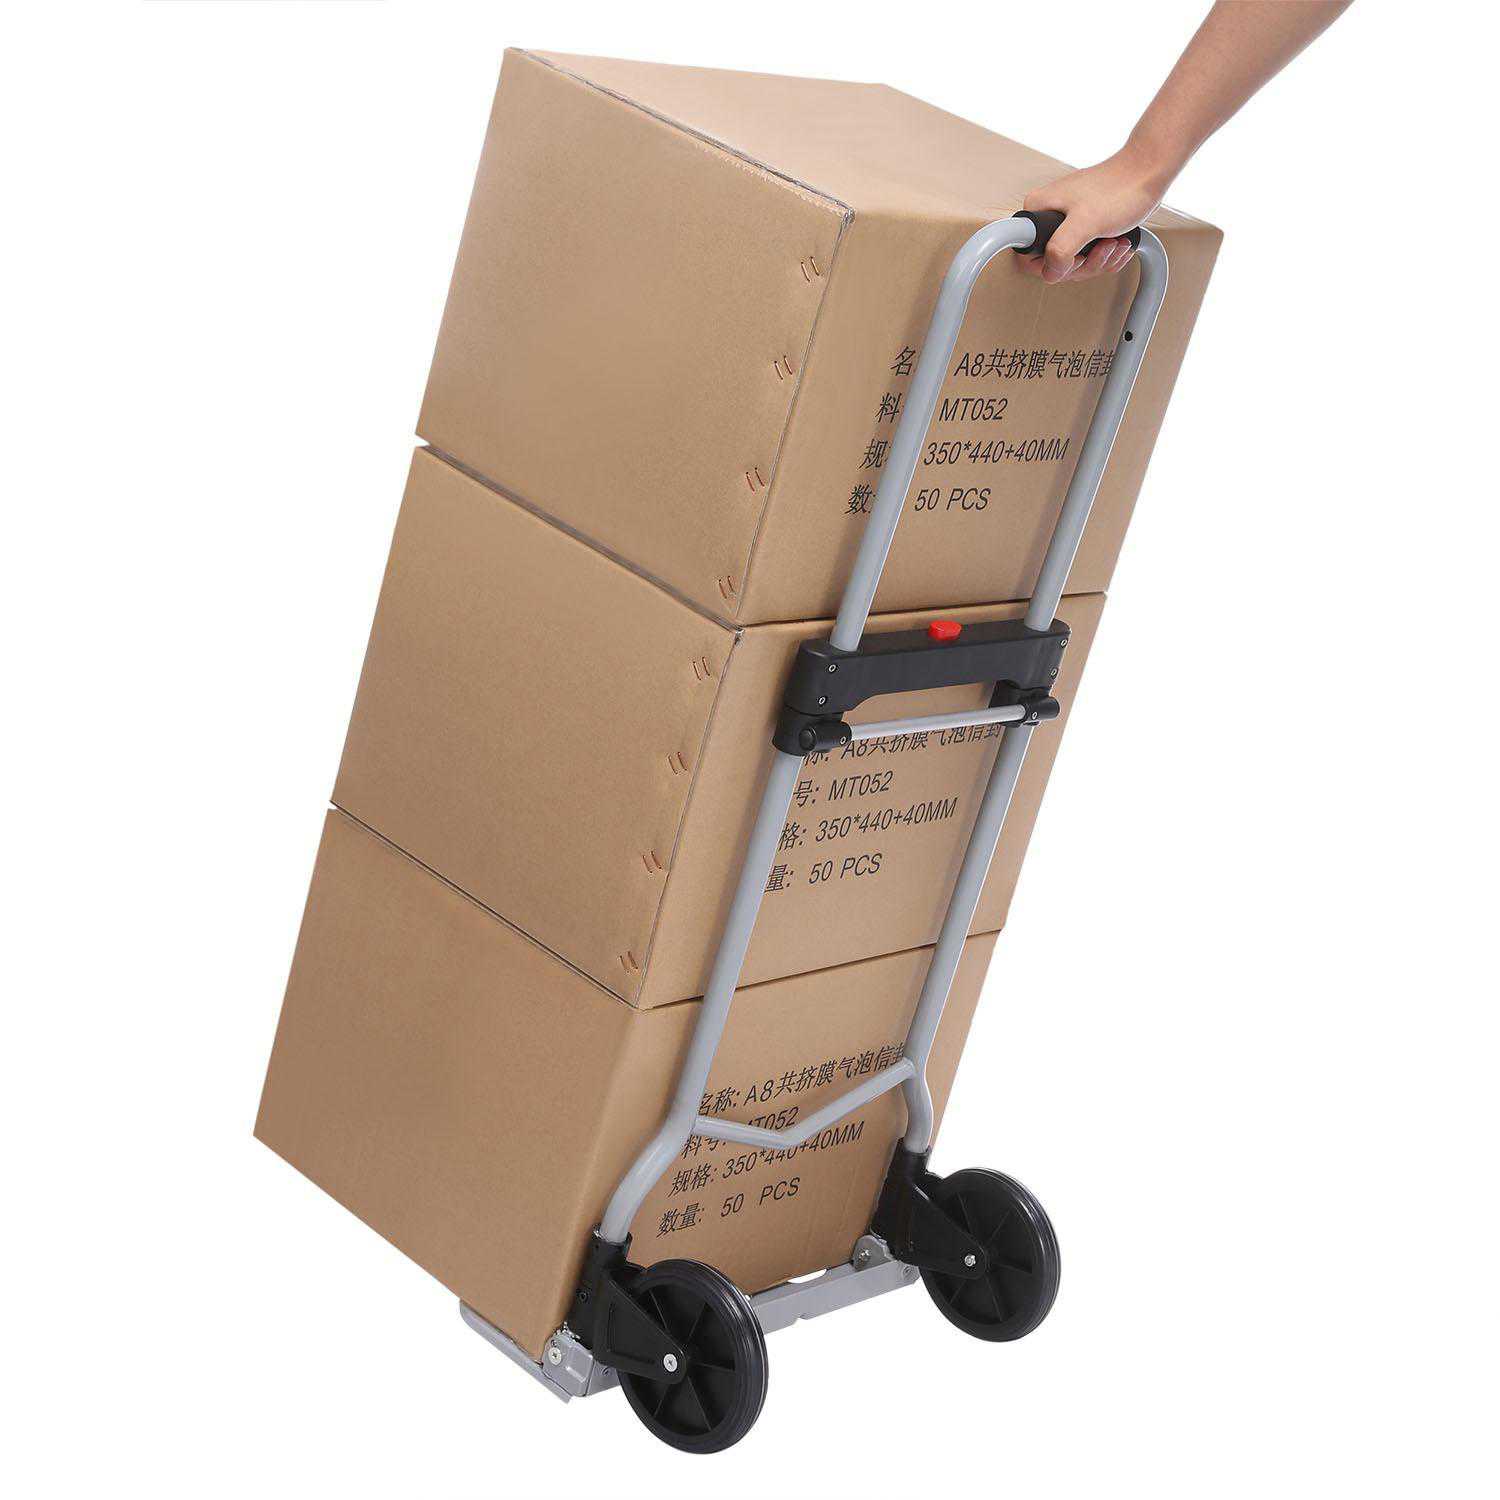 Portable Folding Hand Truck Dolly Luggage Carts, Silver, 220 lbs Capacity, Industrial/Travel/Shopping WSY